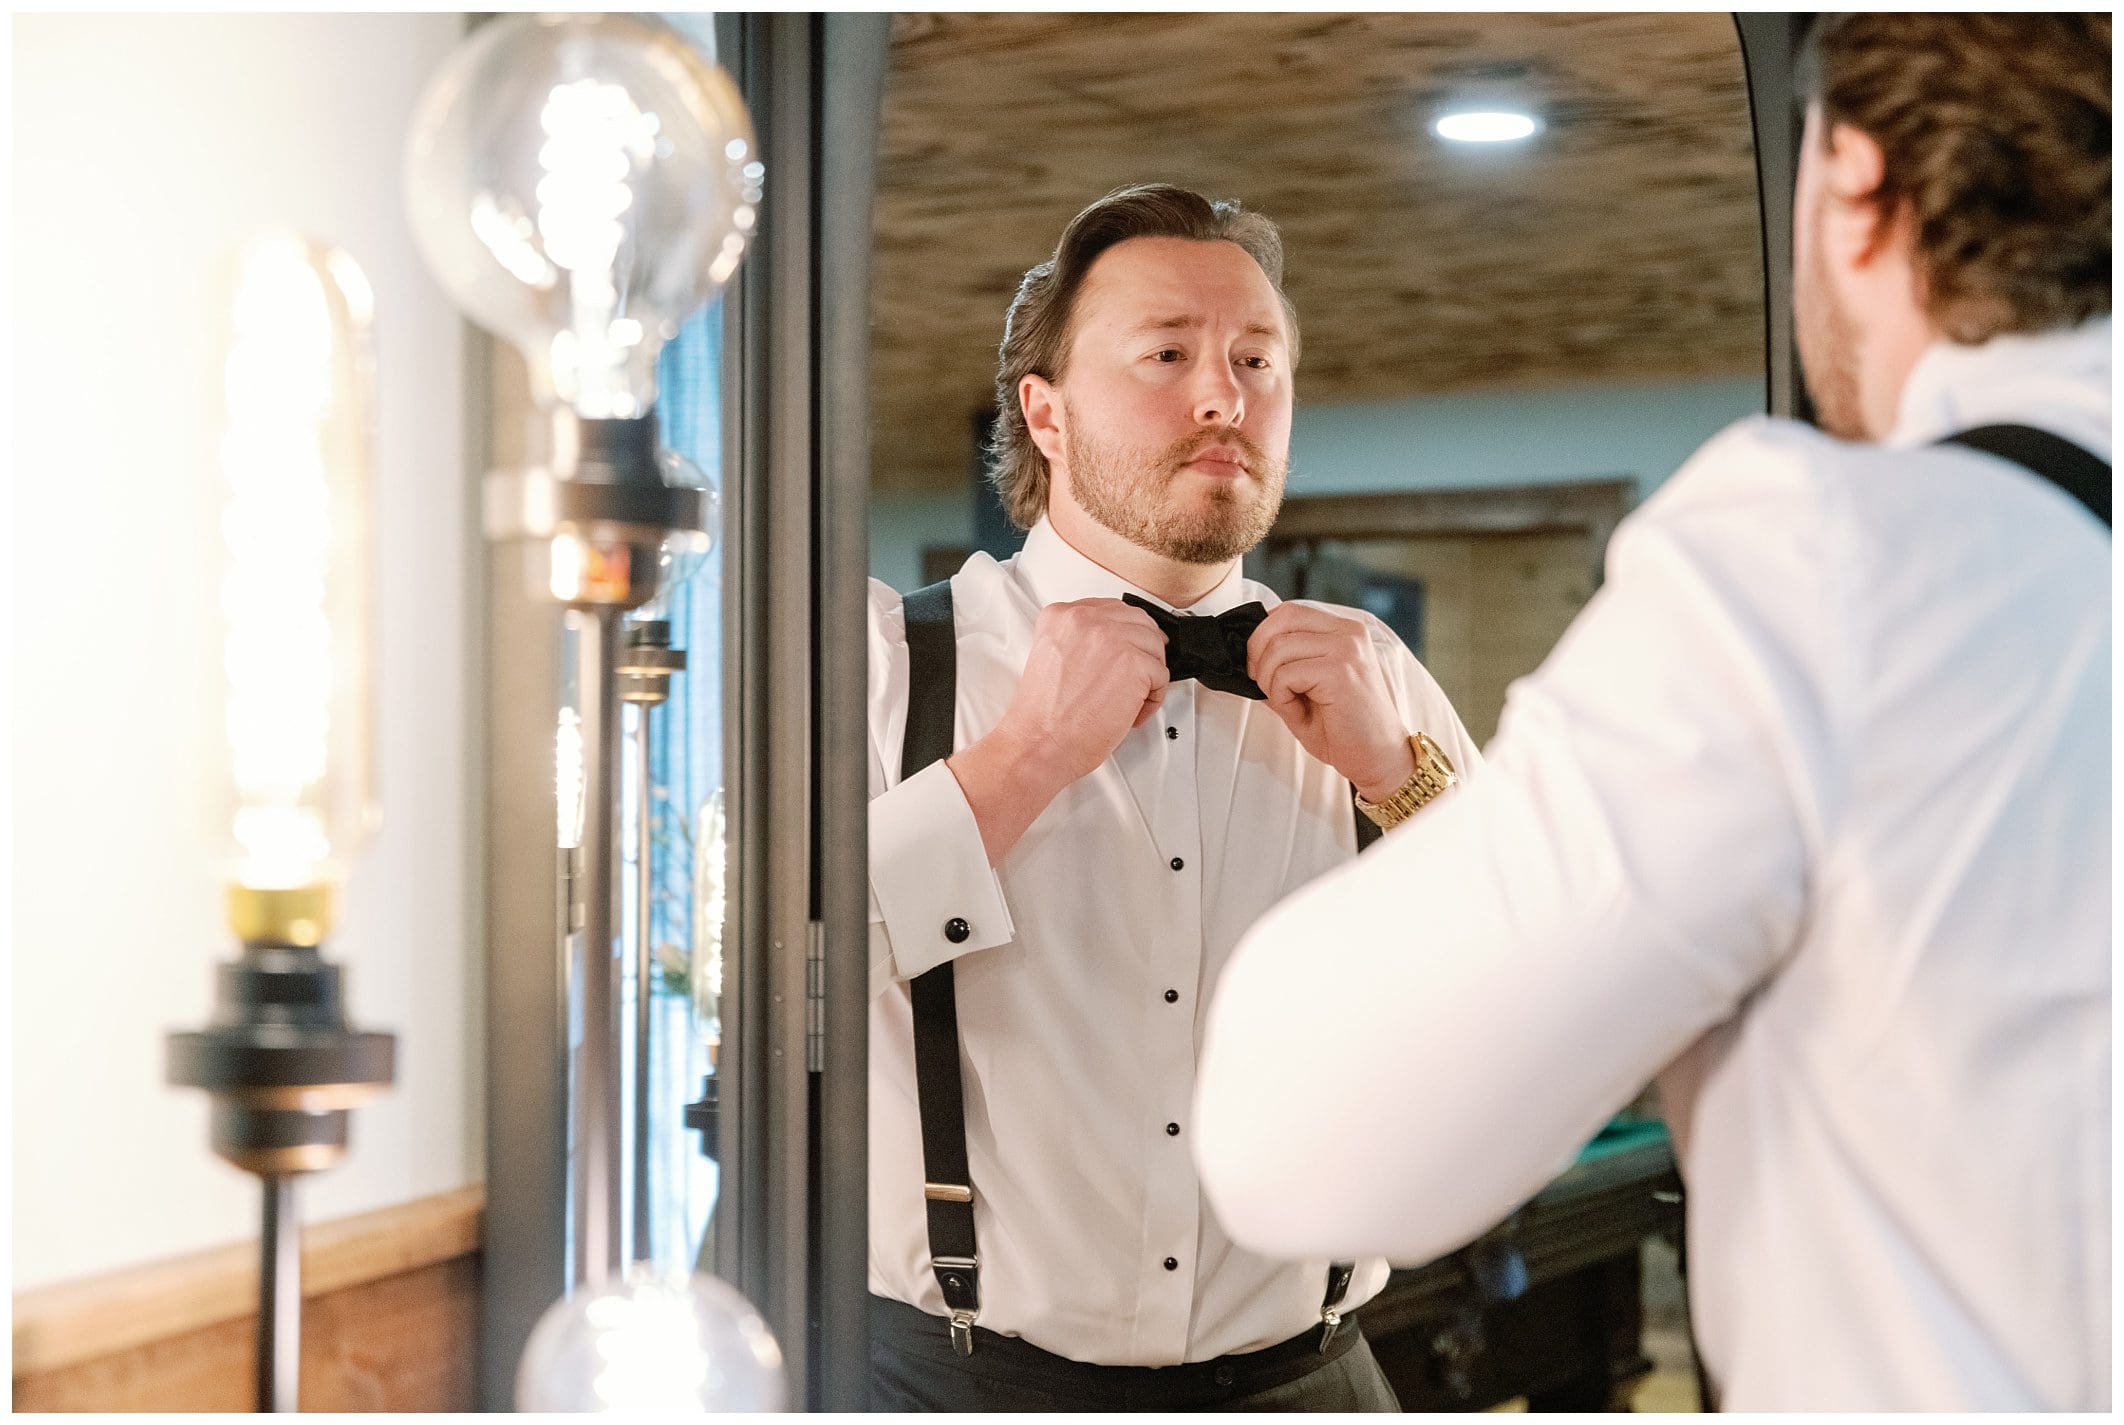 A man in a white dress shirt and suspenders adjusts his bow tie while looking at his reflection in a mirror, surrounded by warm lighting.